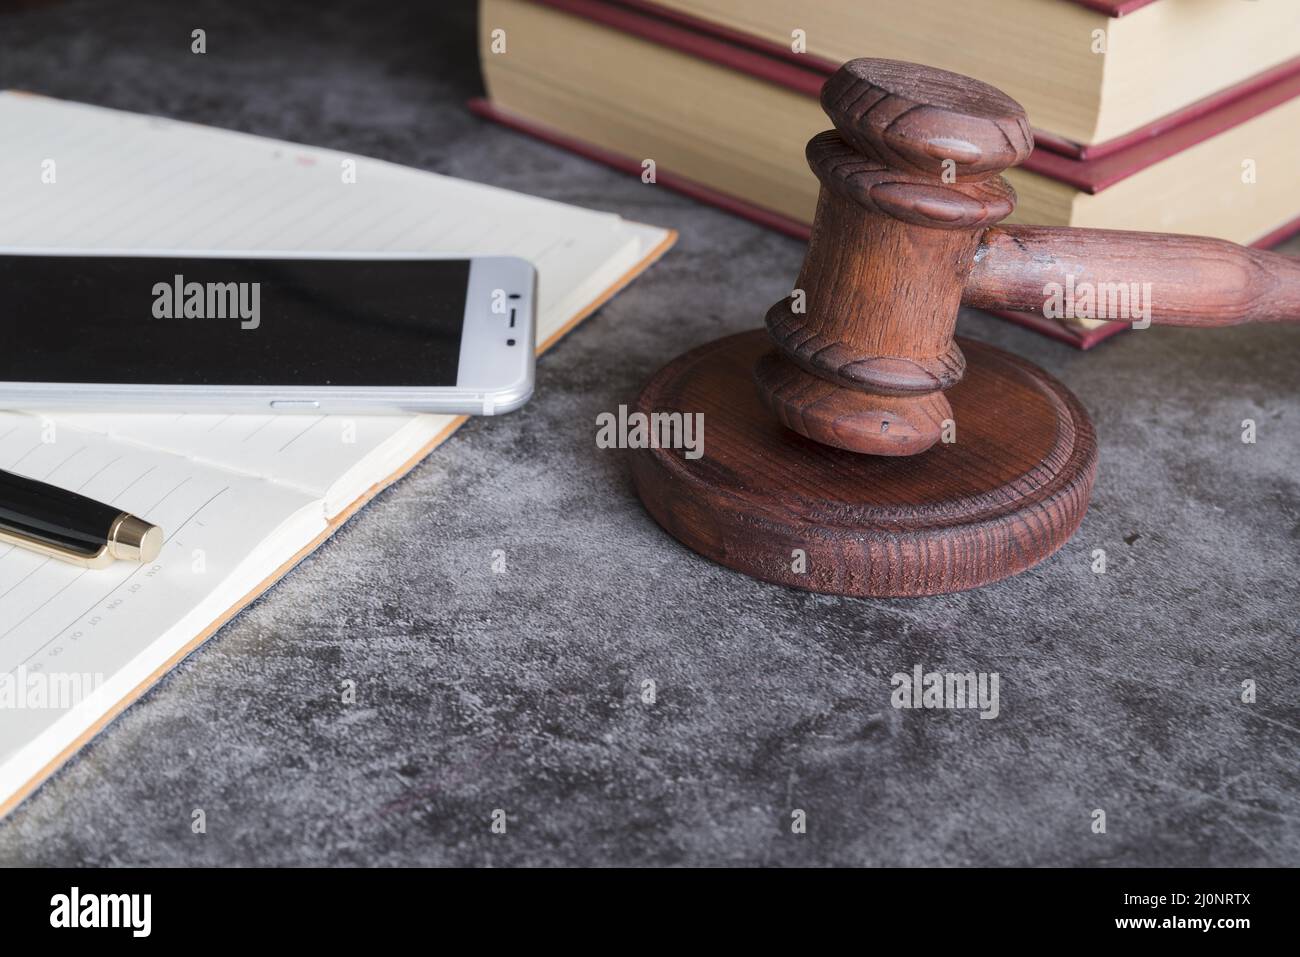 Lawyer tools . High quality and resolution beautiful photo concept Stock Photo